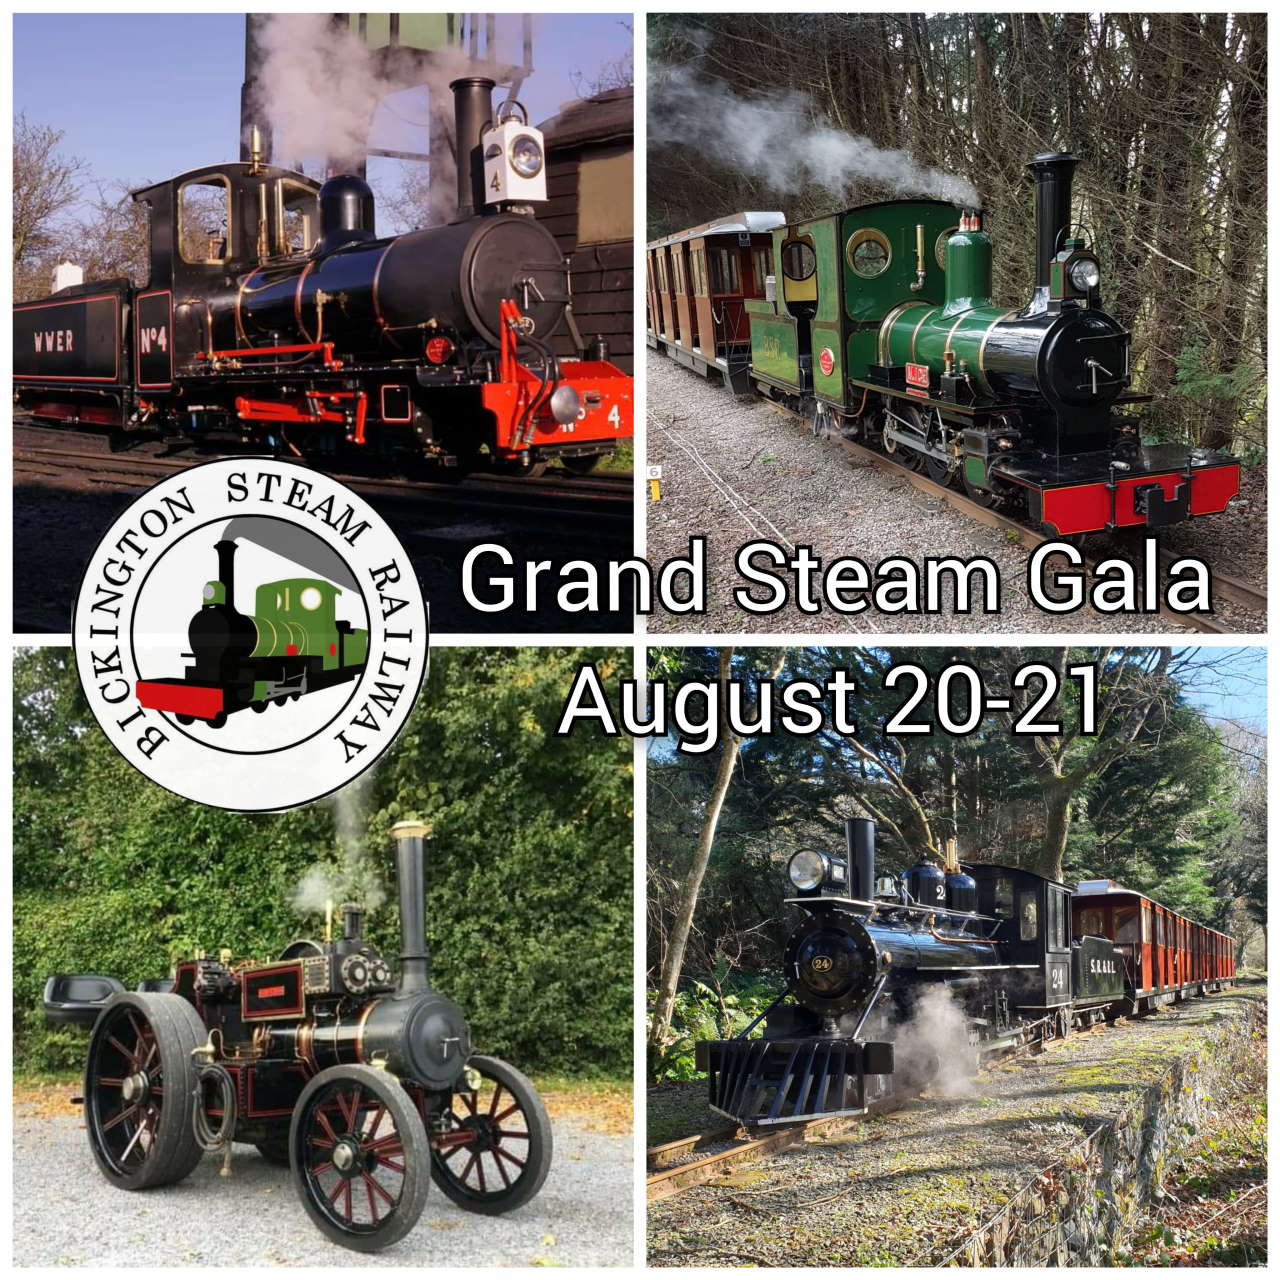 Trago Mills to hold steam gala in August